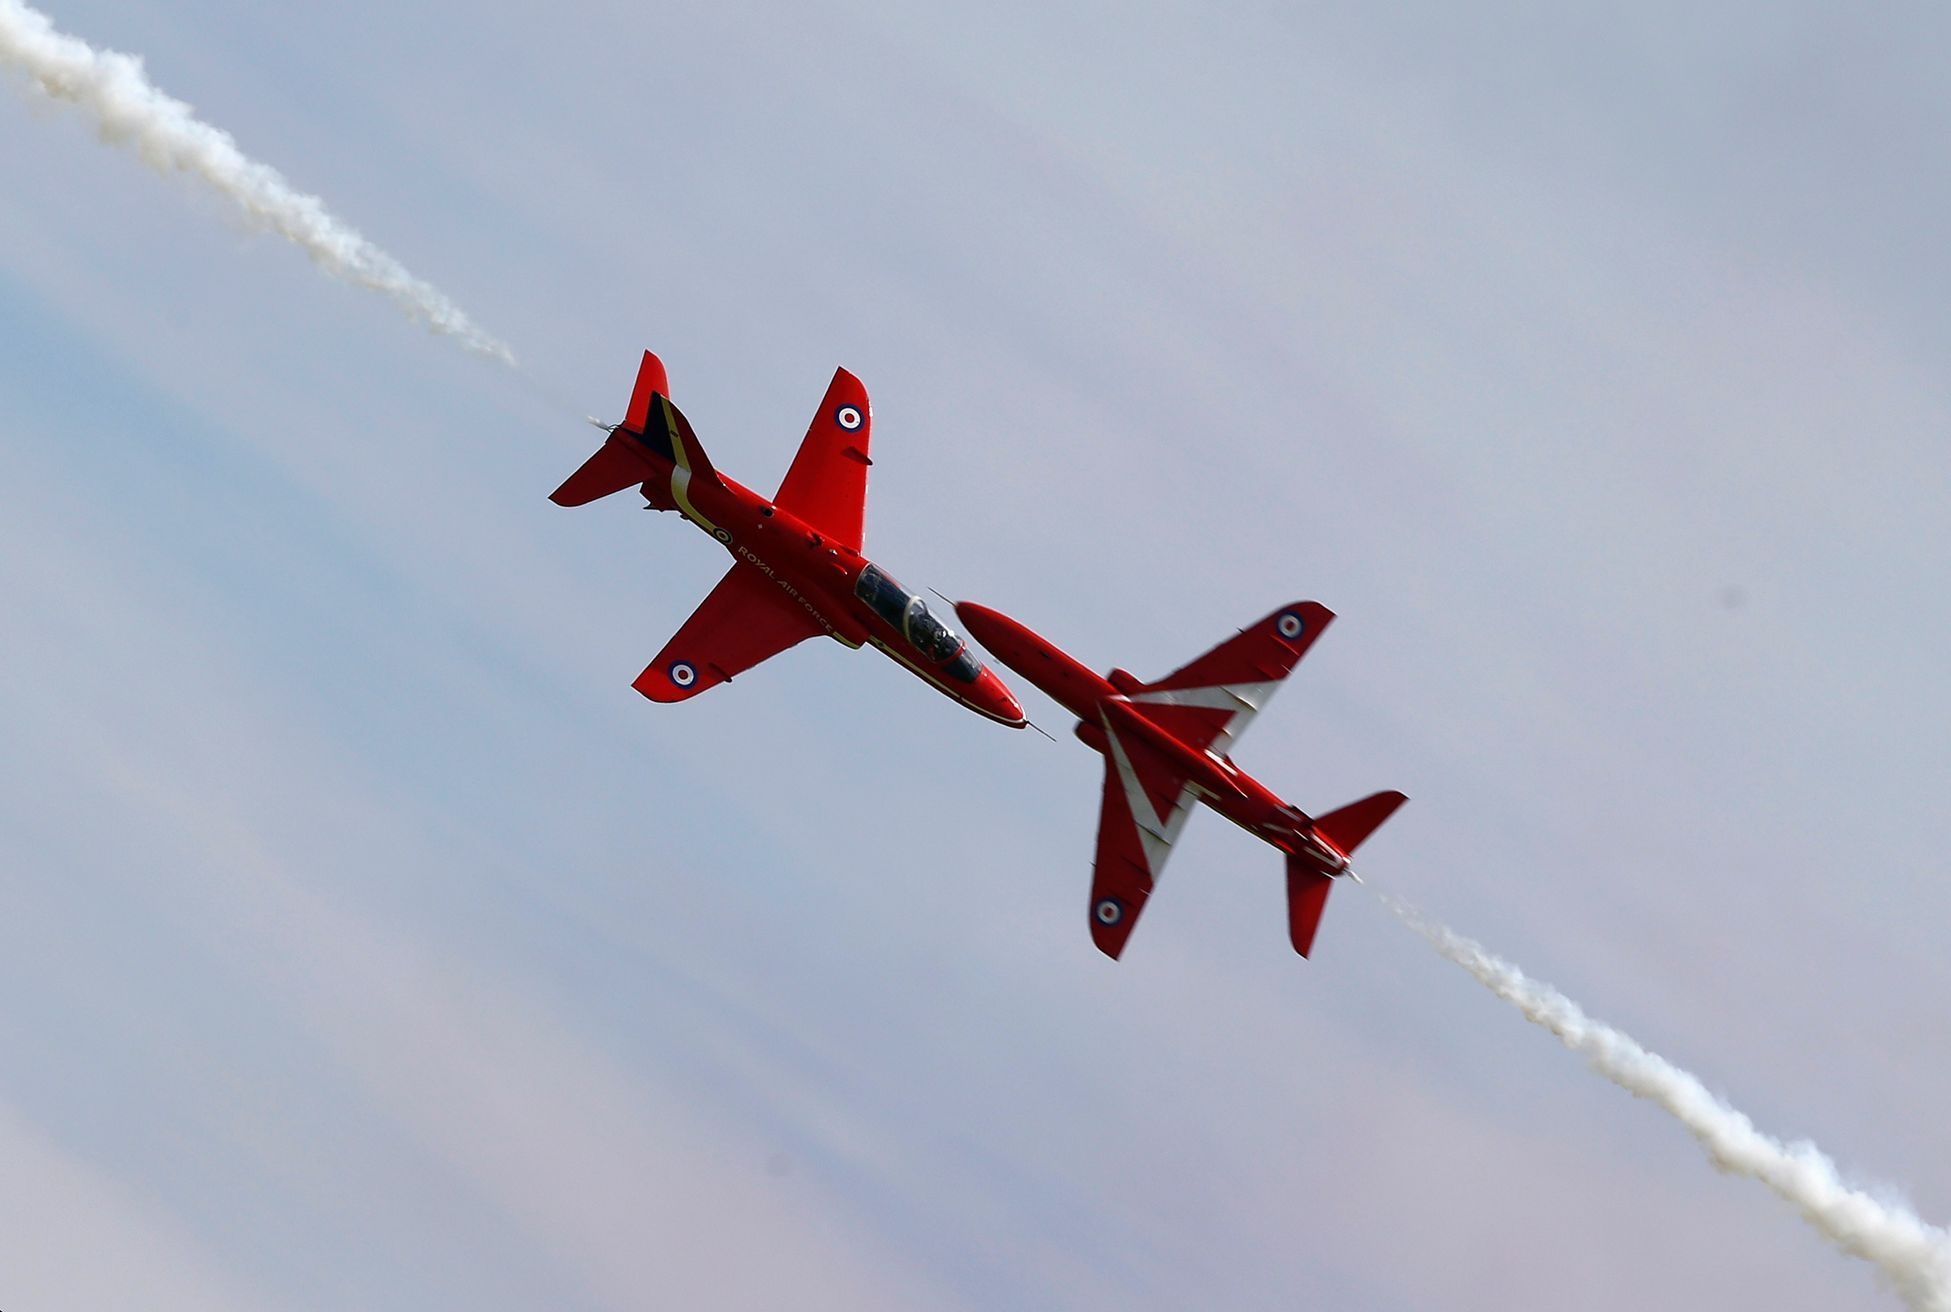 The Red Arrows perform before the British Grand Prix at the